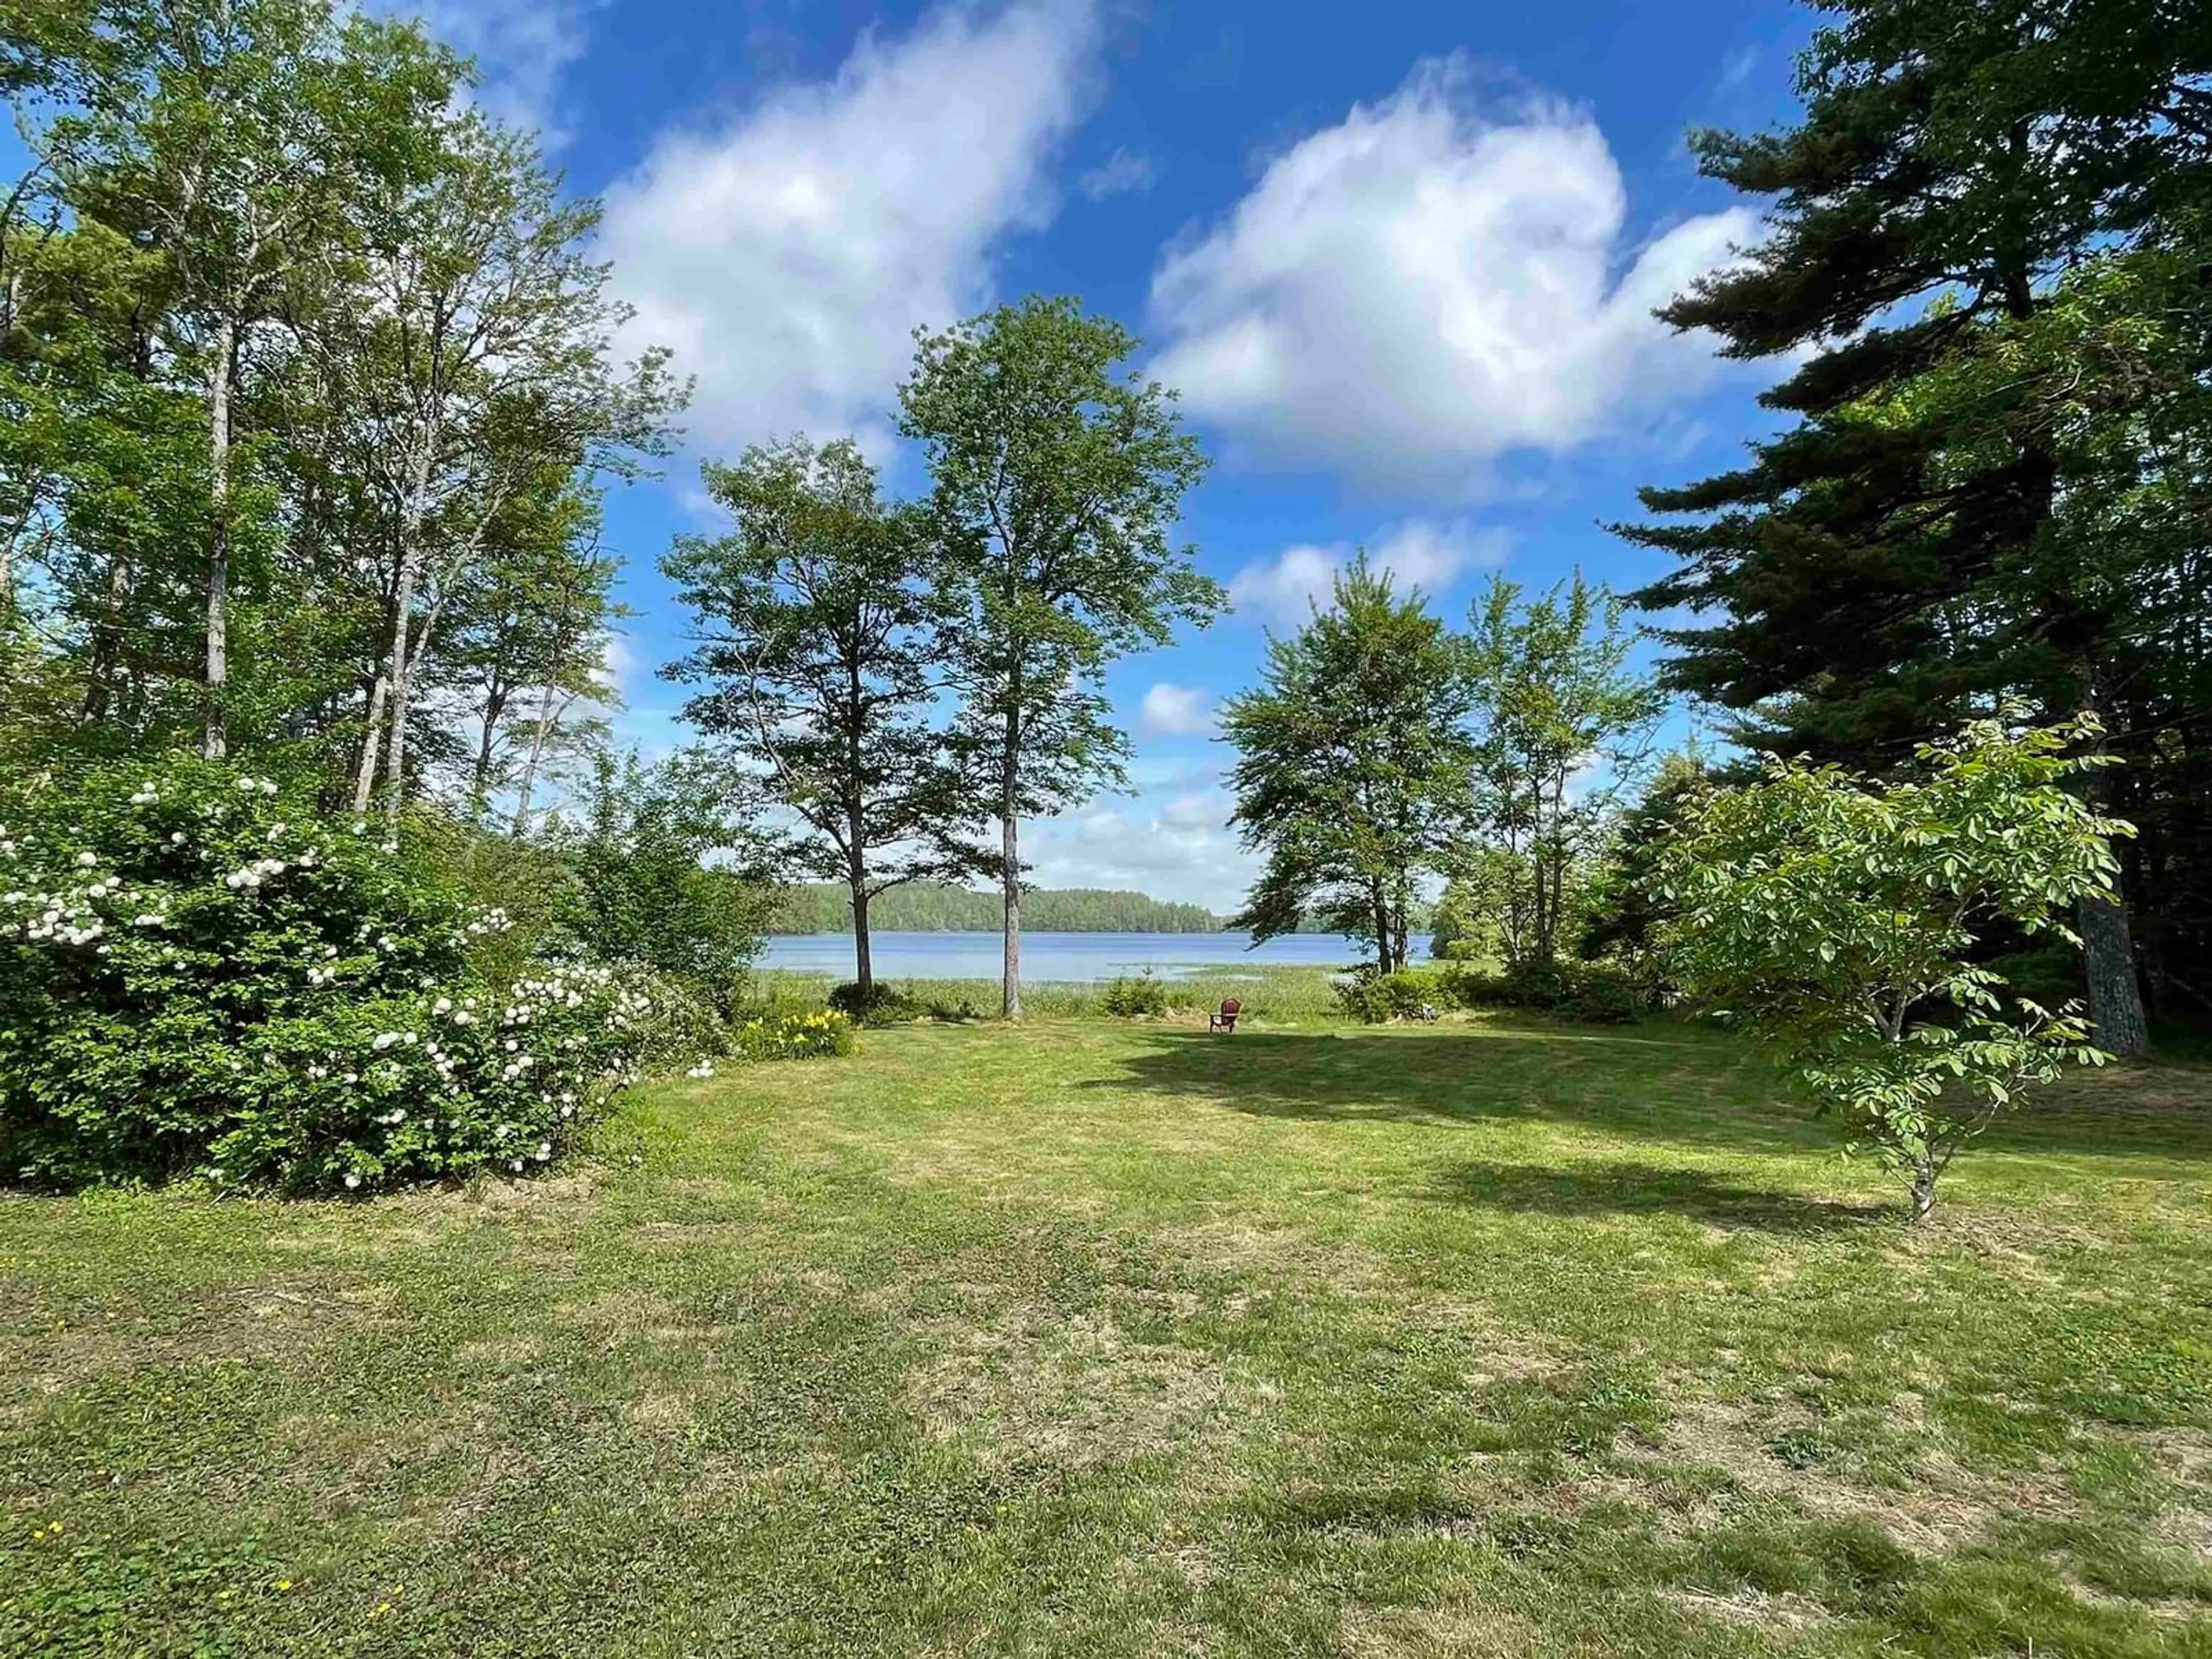 Lakeview for 9 Silver Rd, North Brookfield Nova Scotia B0T 1X0